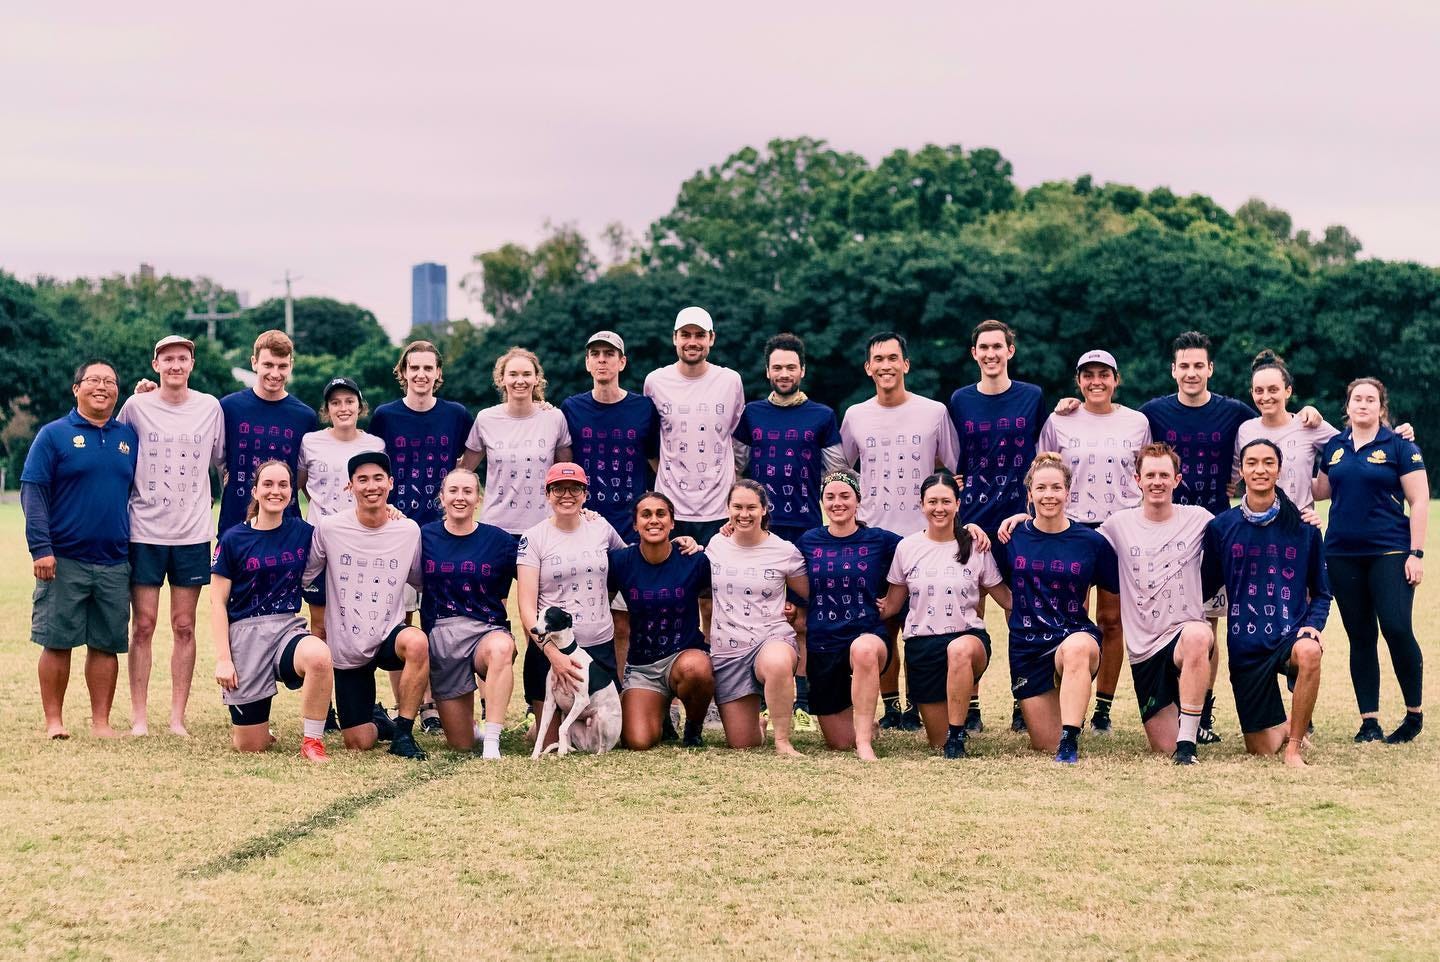 Lunchbox Ultimate team photo on InsideOut ultimate